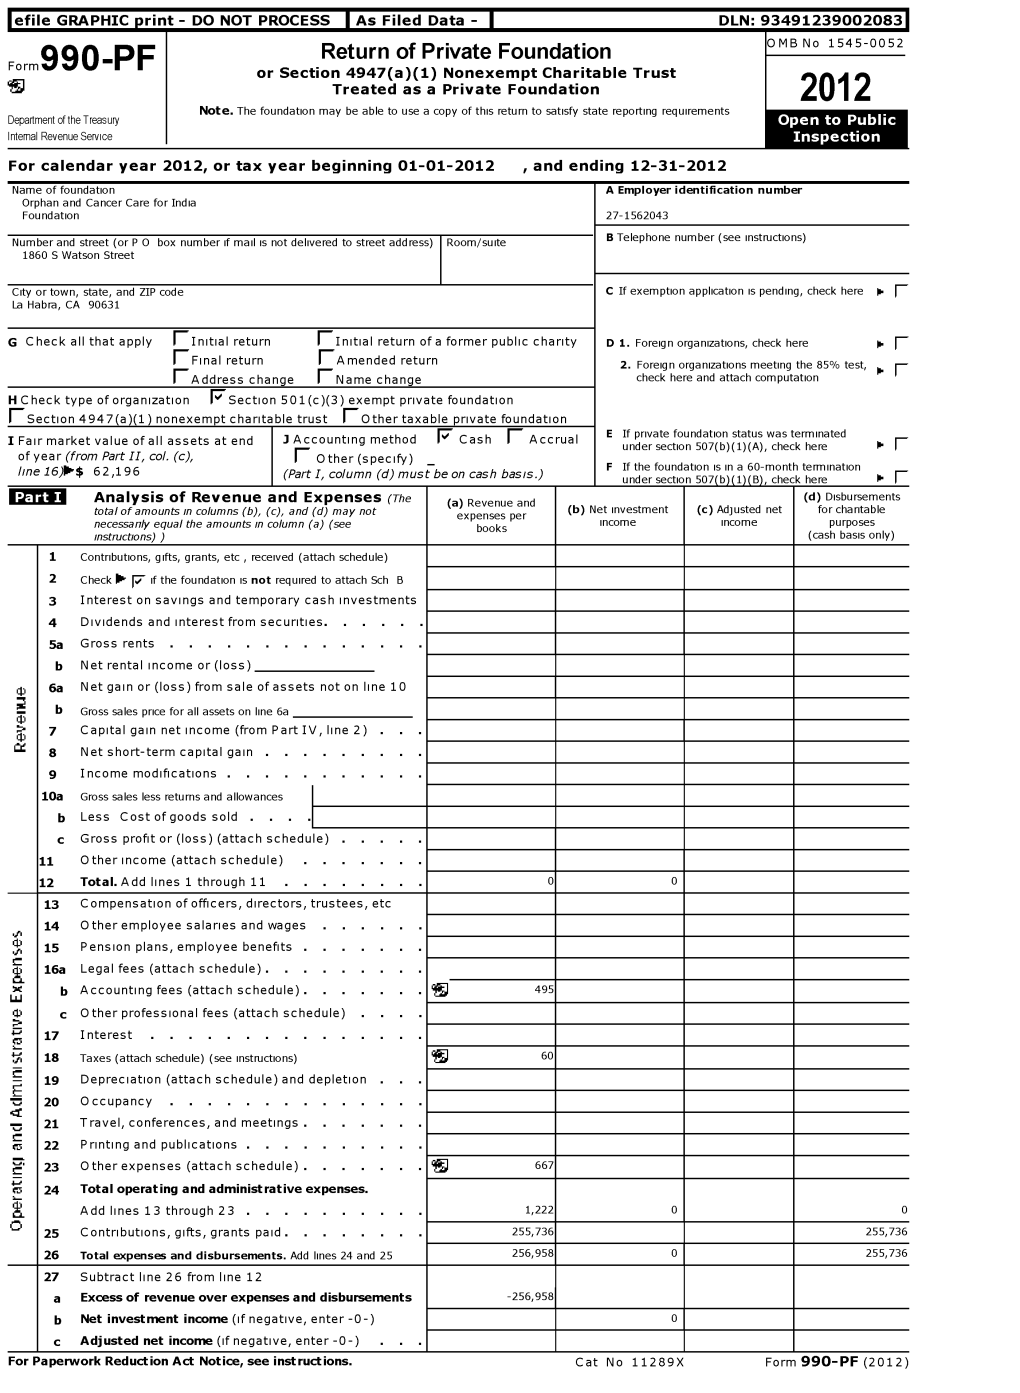 Return of Private Foundation OMB No 1545-0052 Form 990 -PF Or Section 4947( A)(1) Nonexempt Charitable Trust ` Treated As a Private Foundation 2012 Note